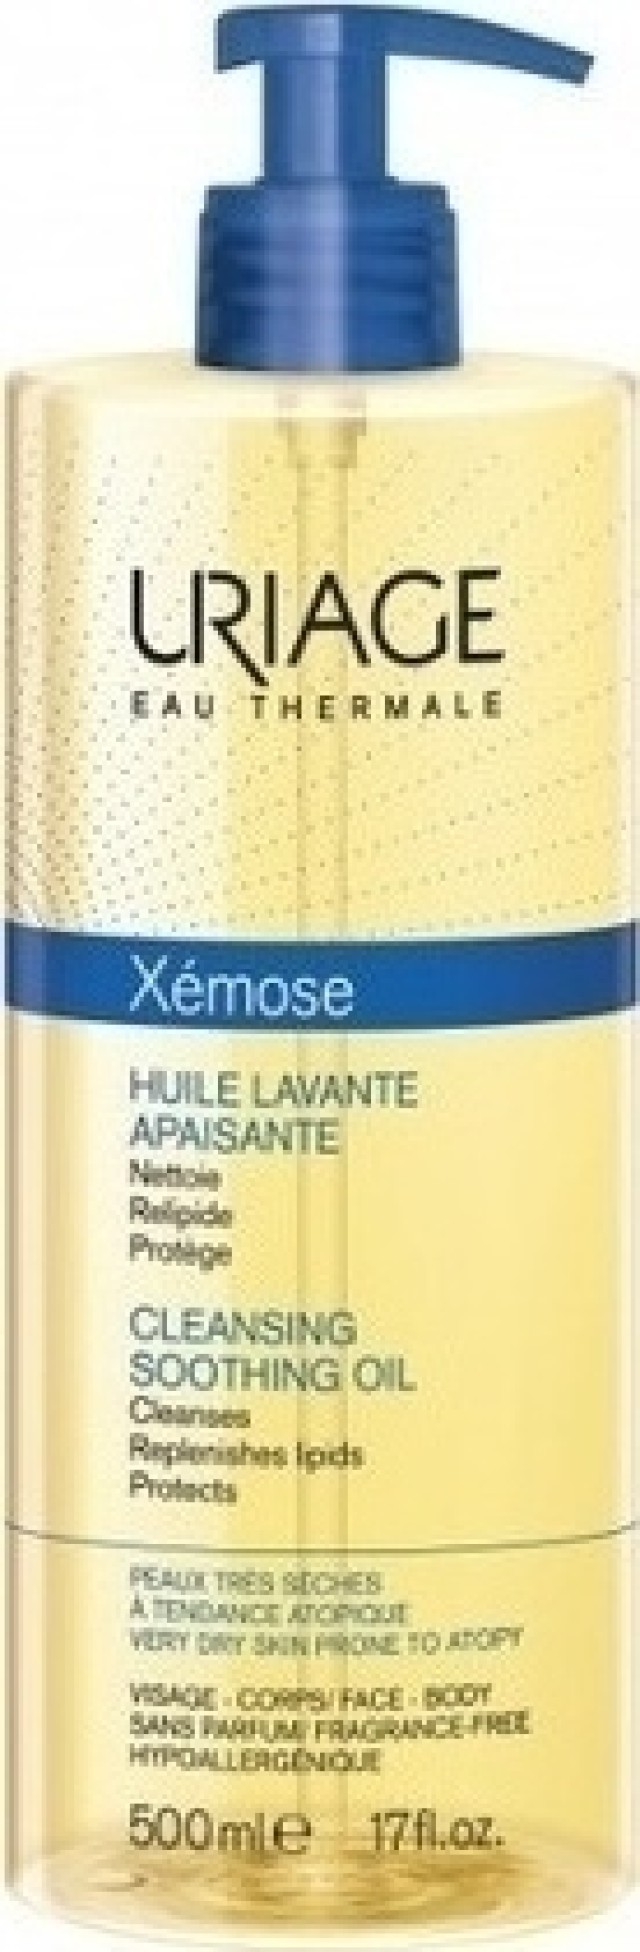 Uriage Xemose Ηuile Lavante Apaisante Cleansing Soothing Oil 500ml